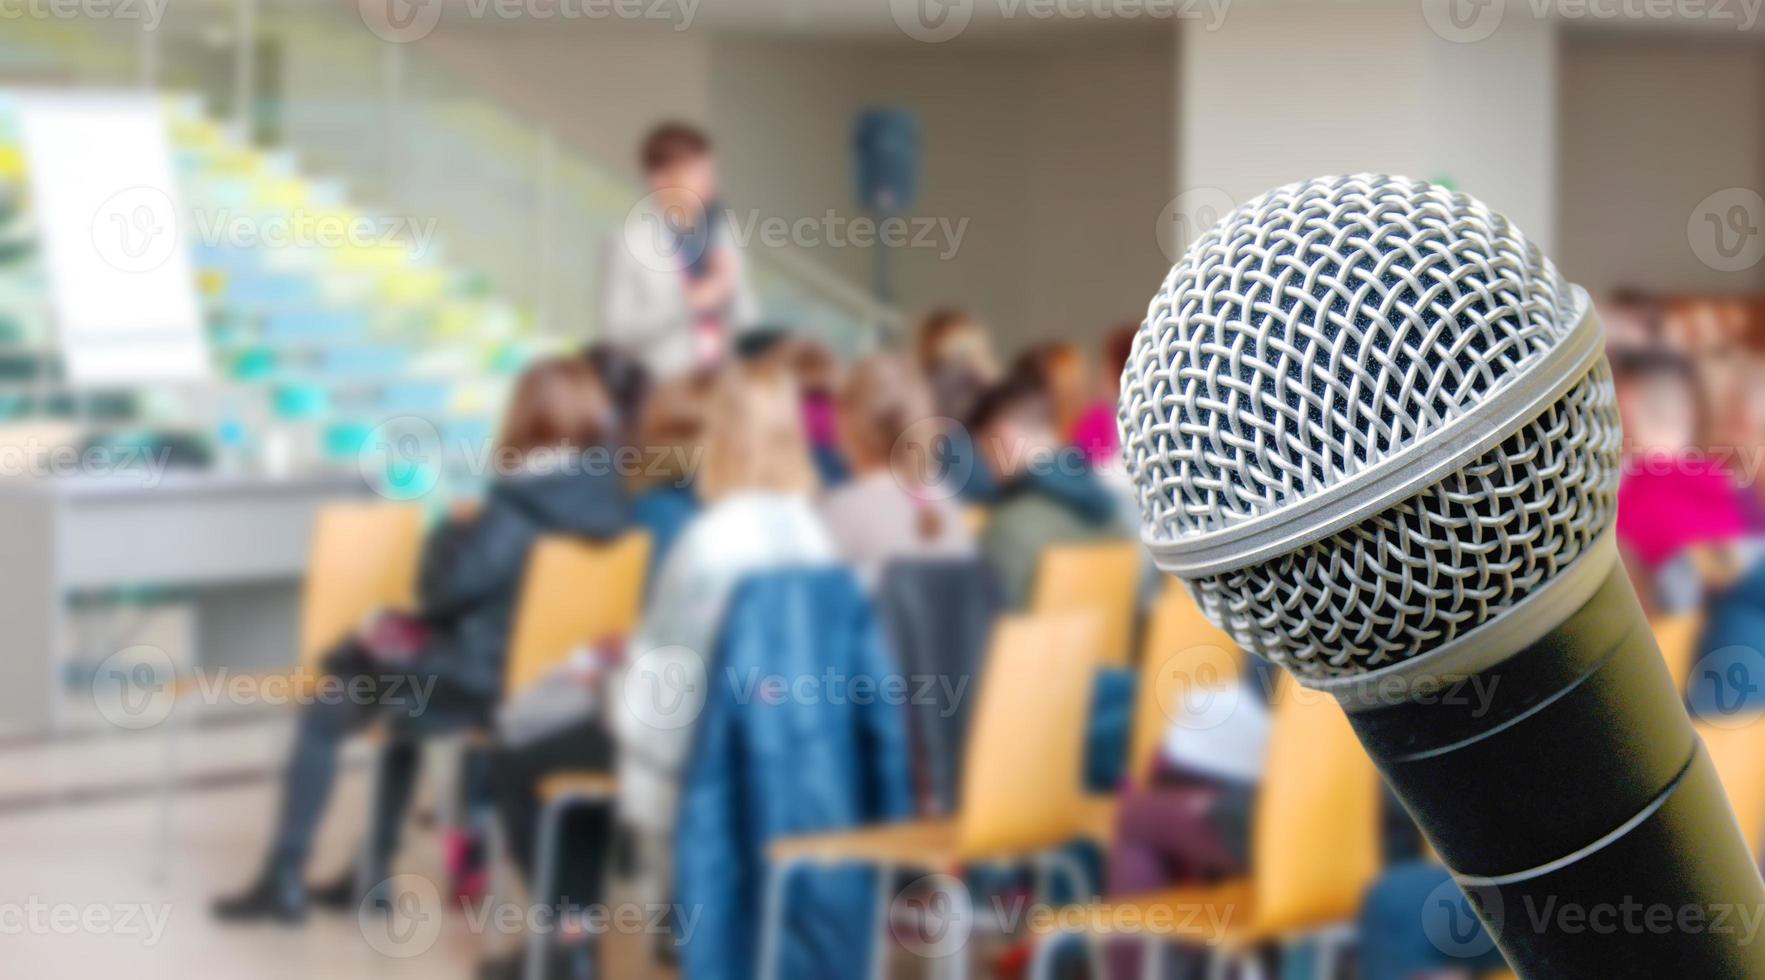 The Top view of meeting room blur background and microphone photo